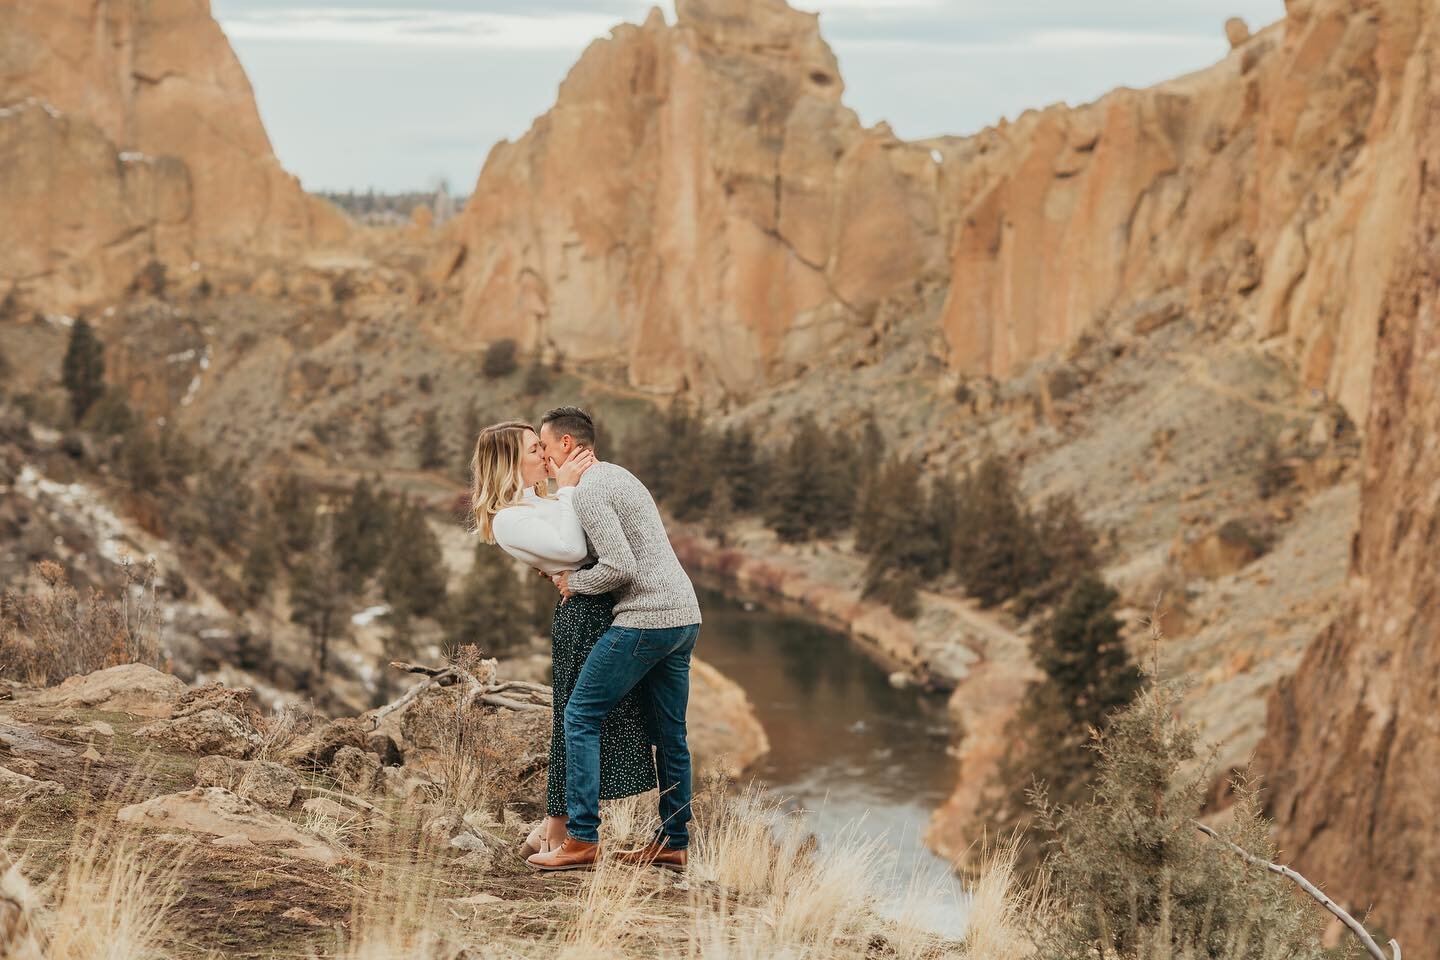 I had the pleasure of capturing Ryan and Hali&rsquo;s engagement photos today at Smith Rock!  Cannot wait for their wedding later this year.  Congrats you two!!! Was so fun getting to know you better &hearts;️
.
.
.
#smithrockengagement #smithrocksta